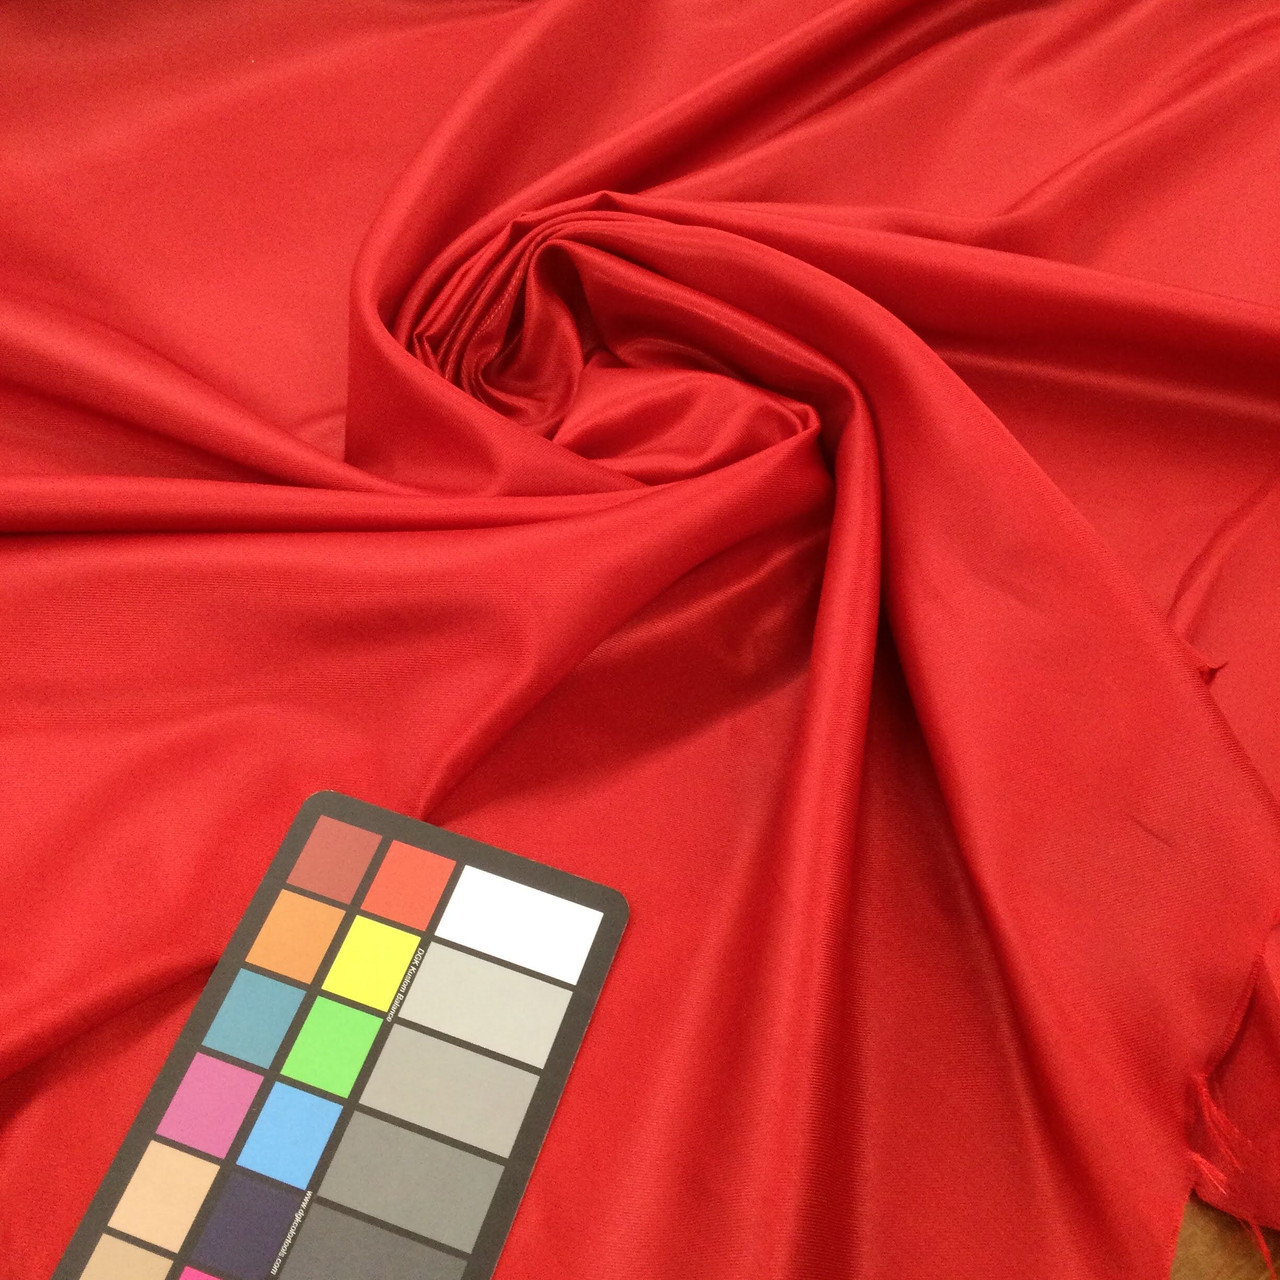 Bright Red Polyester Satin Lining Fabric / Bias Stripe Texture / Clothing  and Apparel / Sold by the Yard / 60 inch wide - Fabric Warehouse